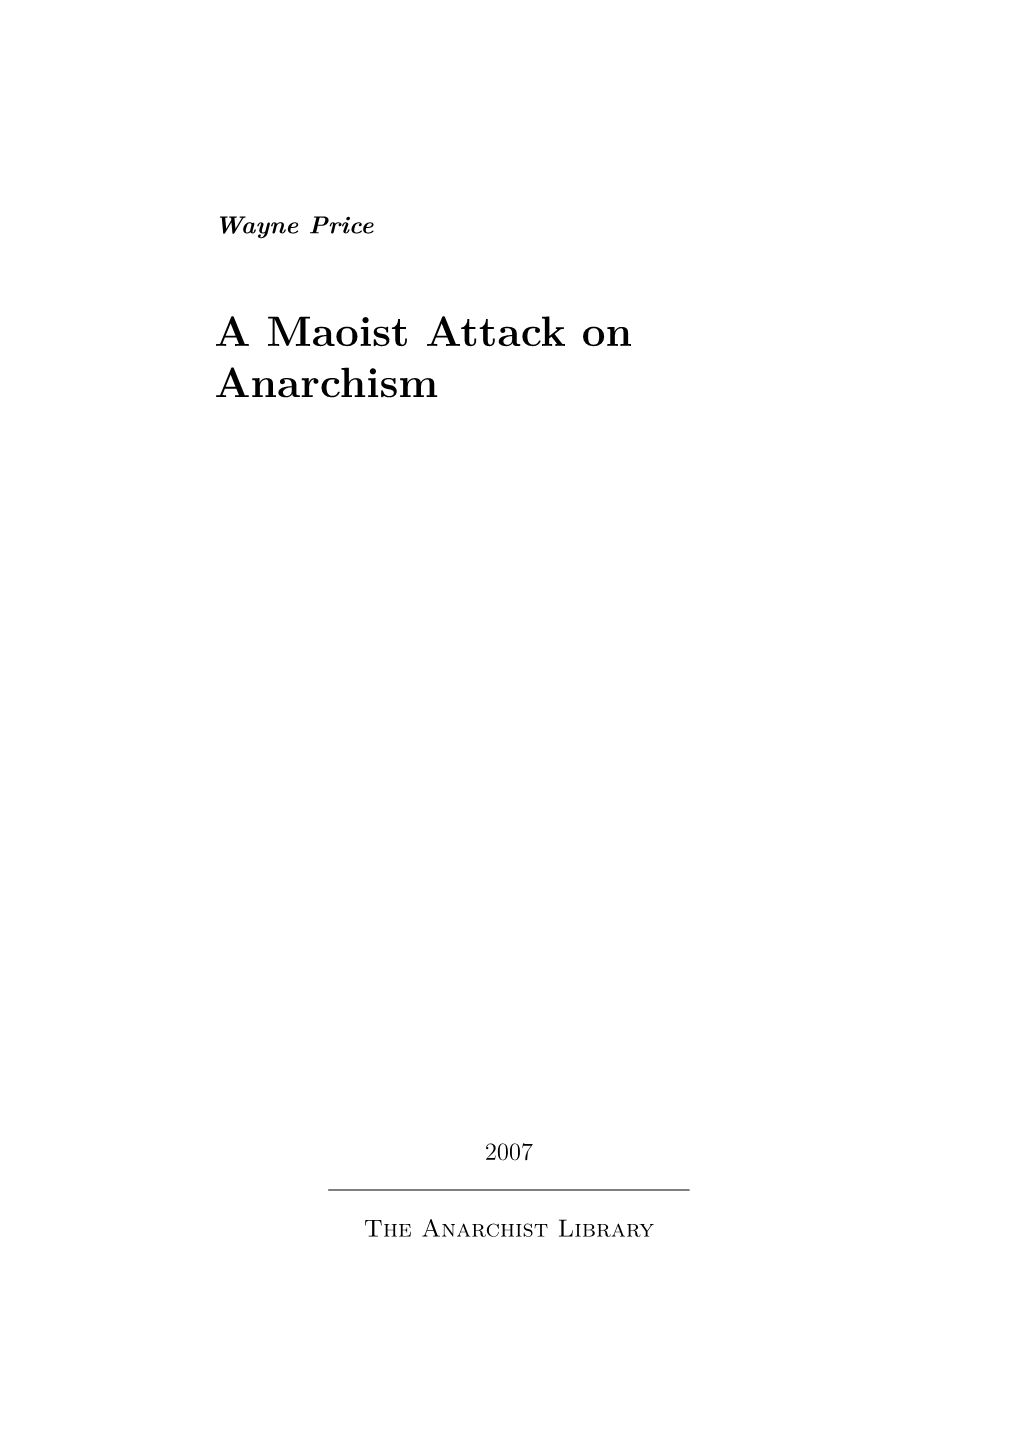 A Maoist Attack on Anarchism